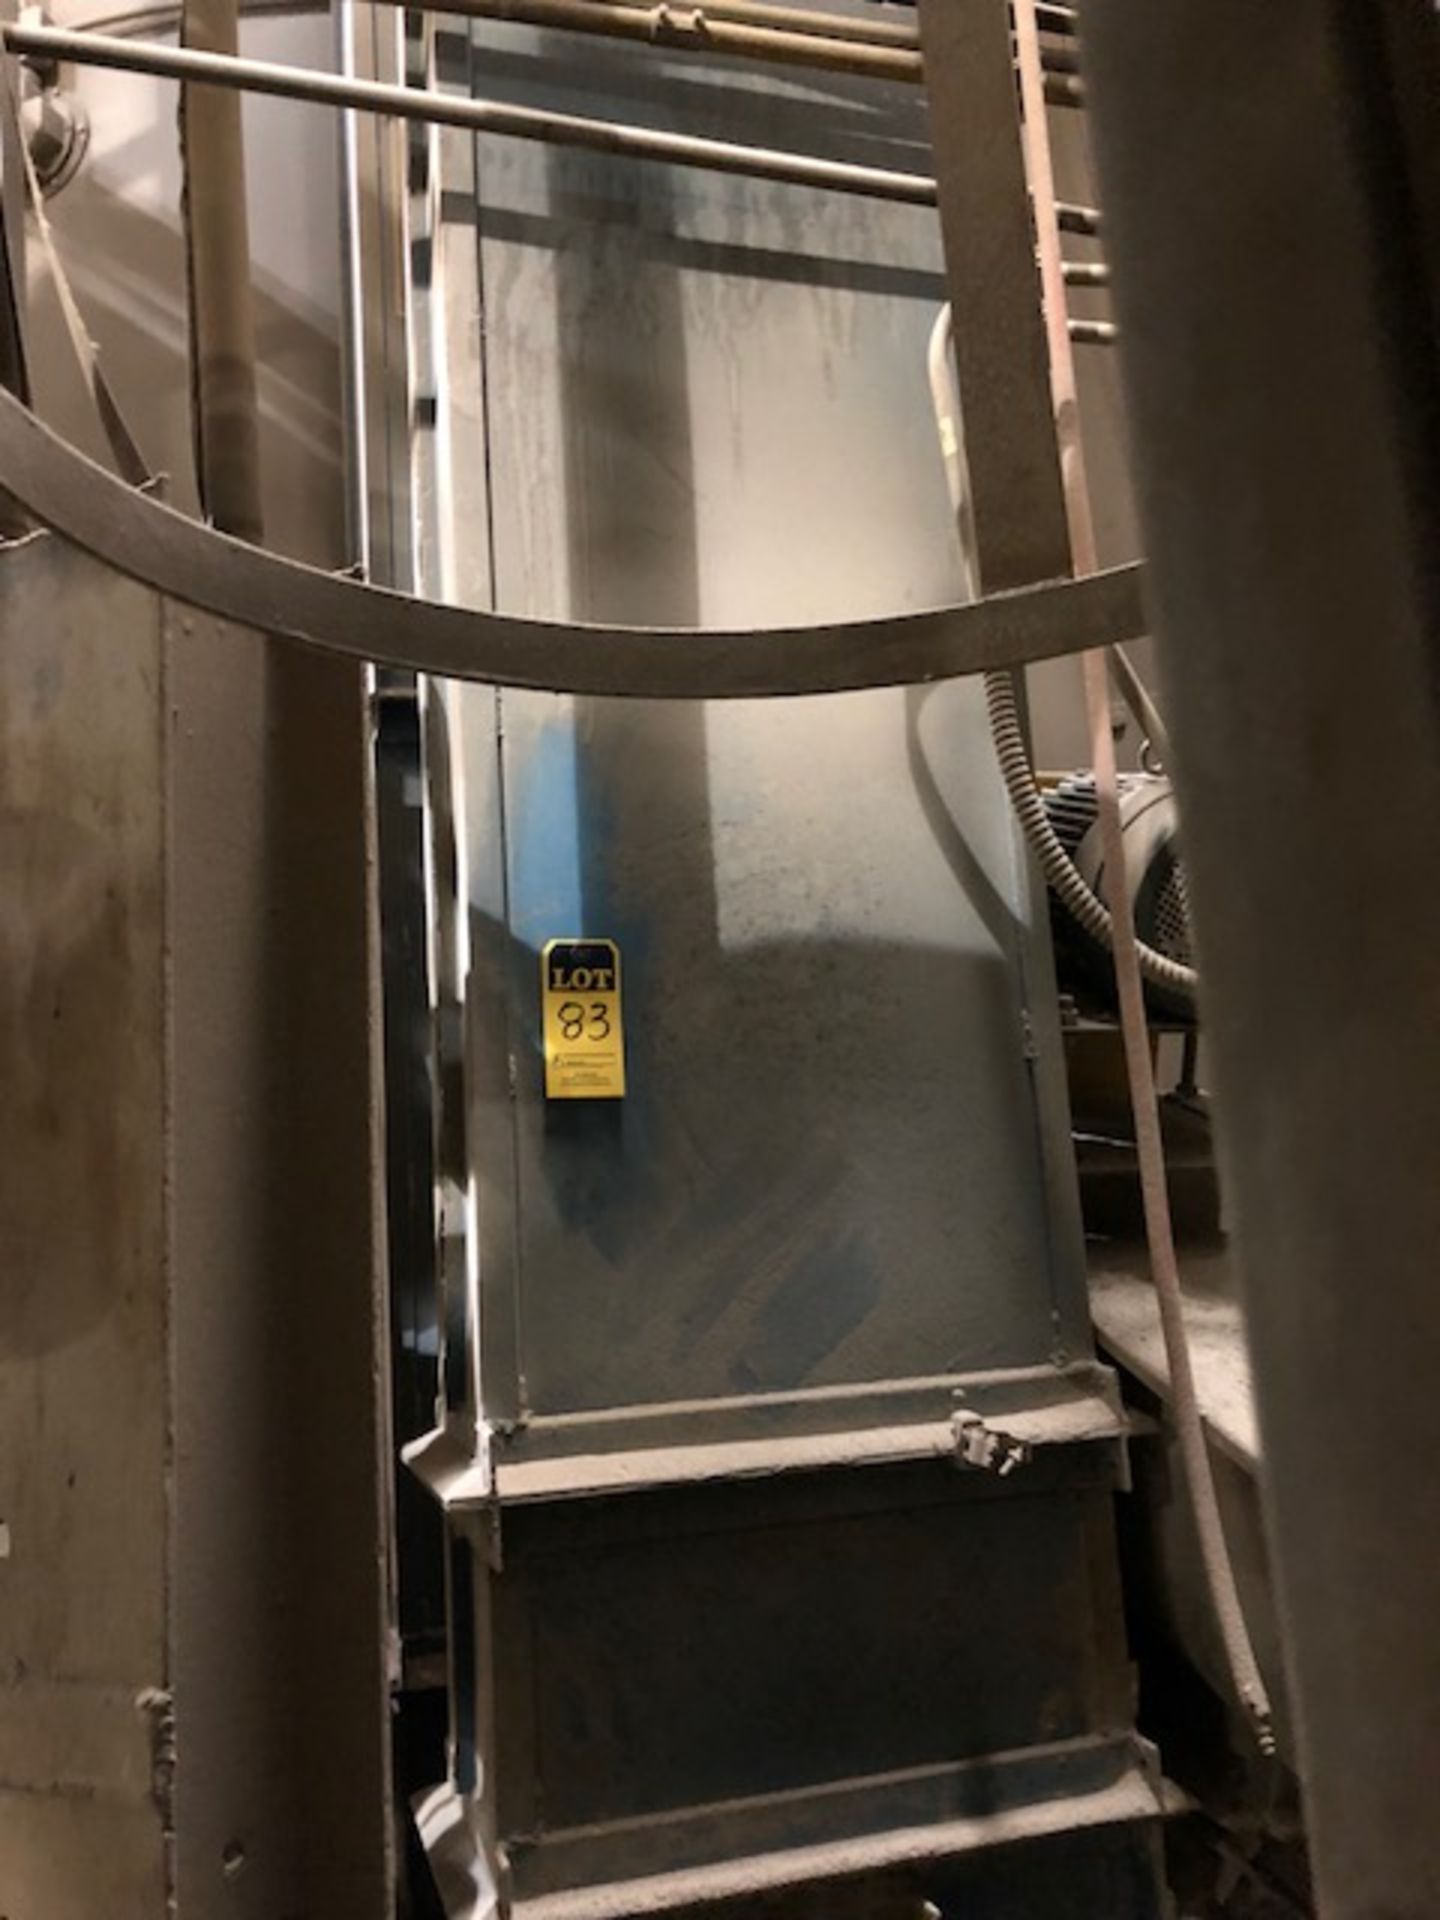 Bucket elevator approx. 20’, subject to group bid lot # 76 - removal available November 12, 2018